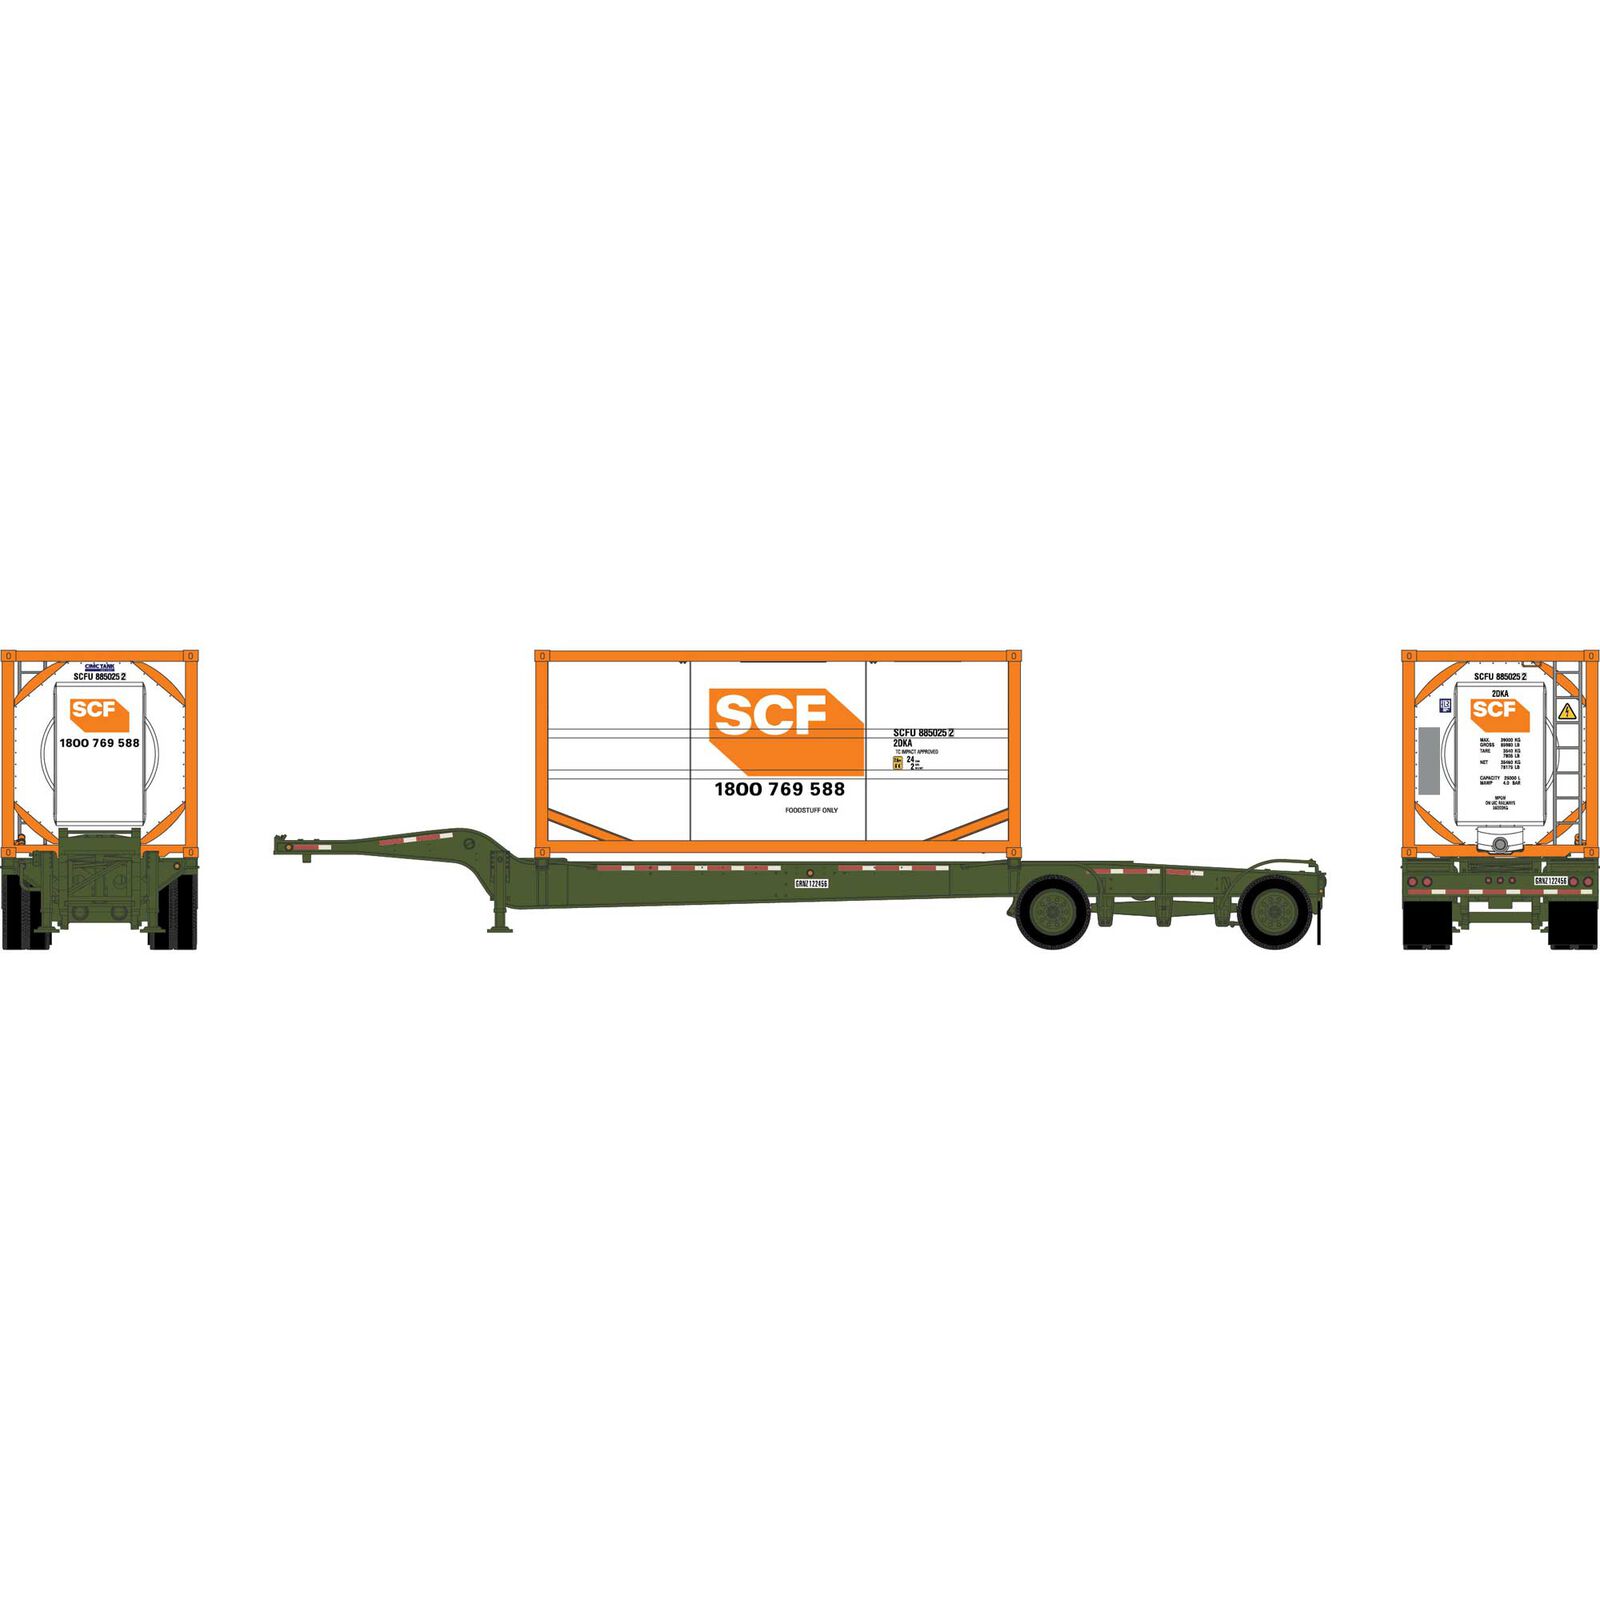 HO Drop-Frame Spread-Axle Chassis with Container, Chassis- Green #122456; Container- SCFU #885025 2